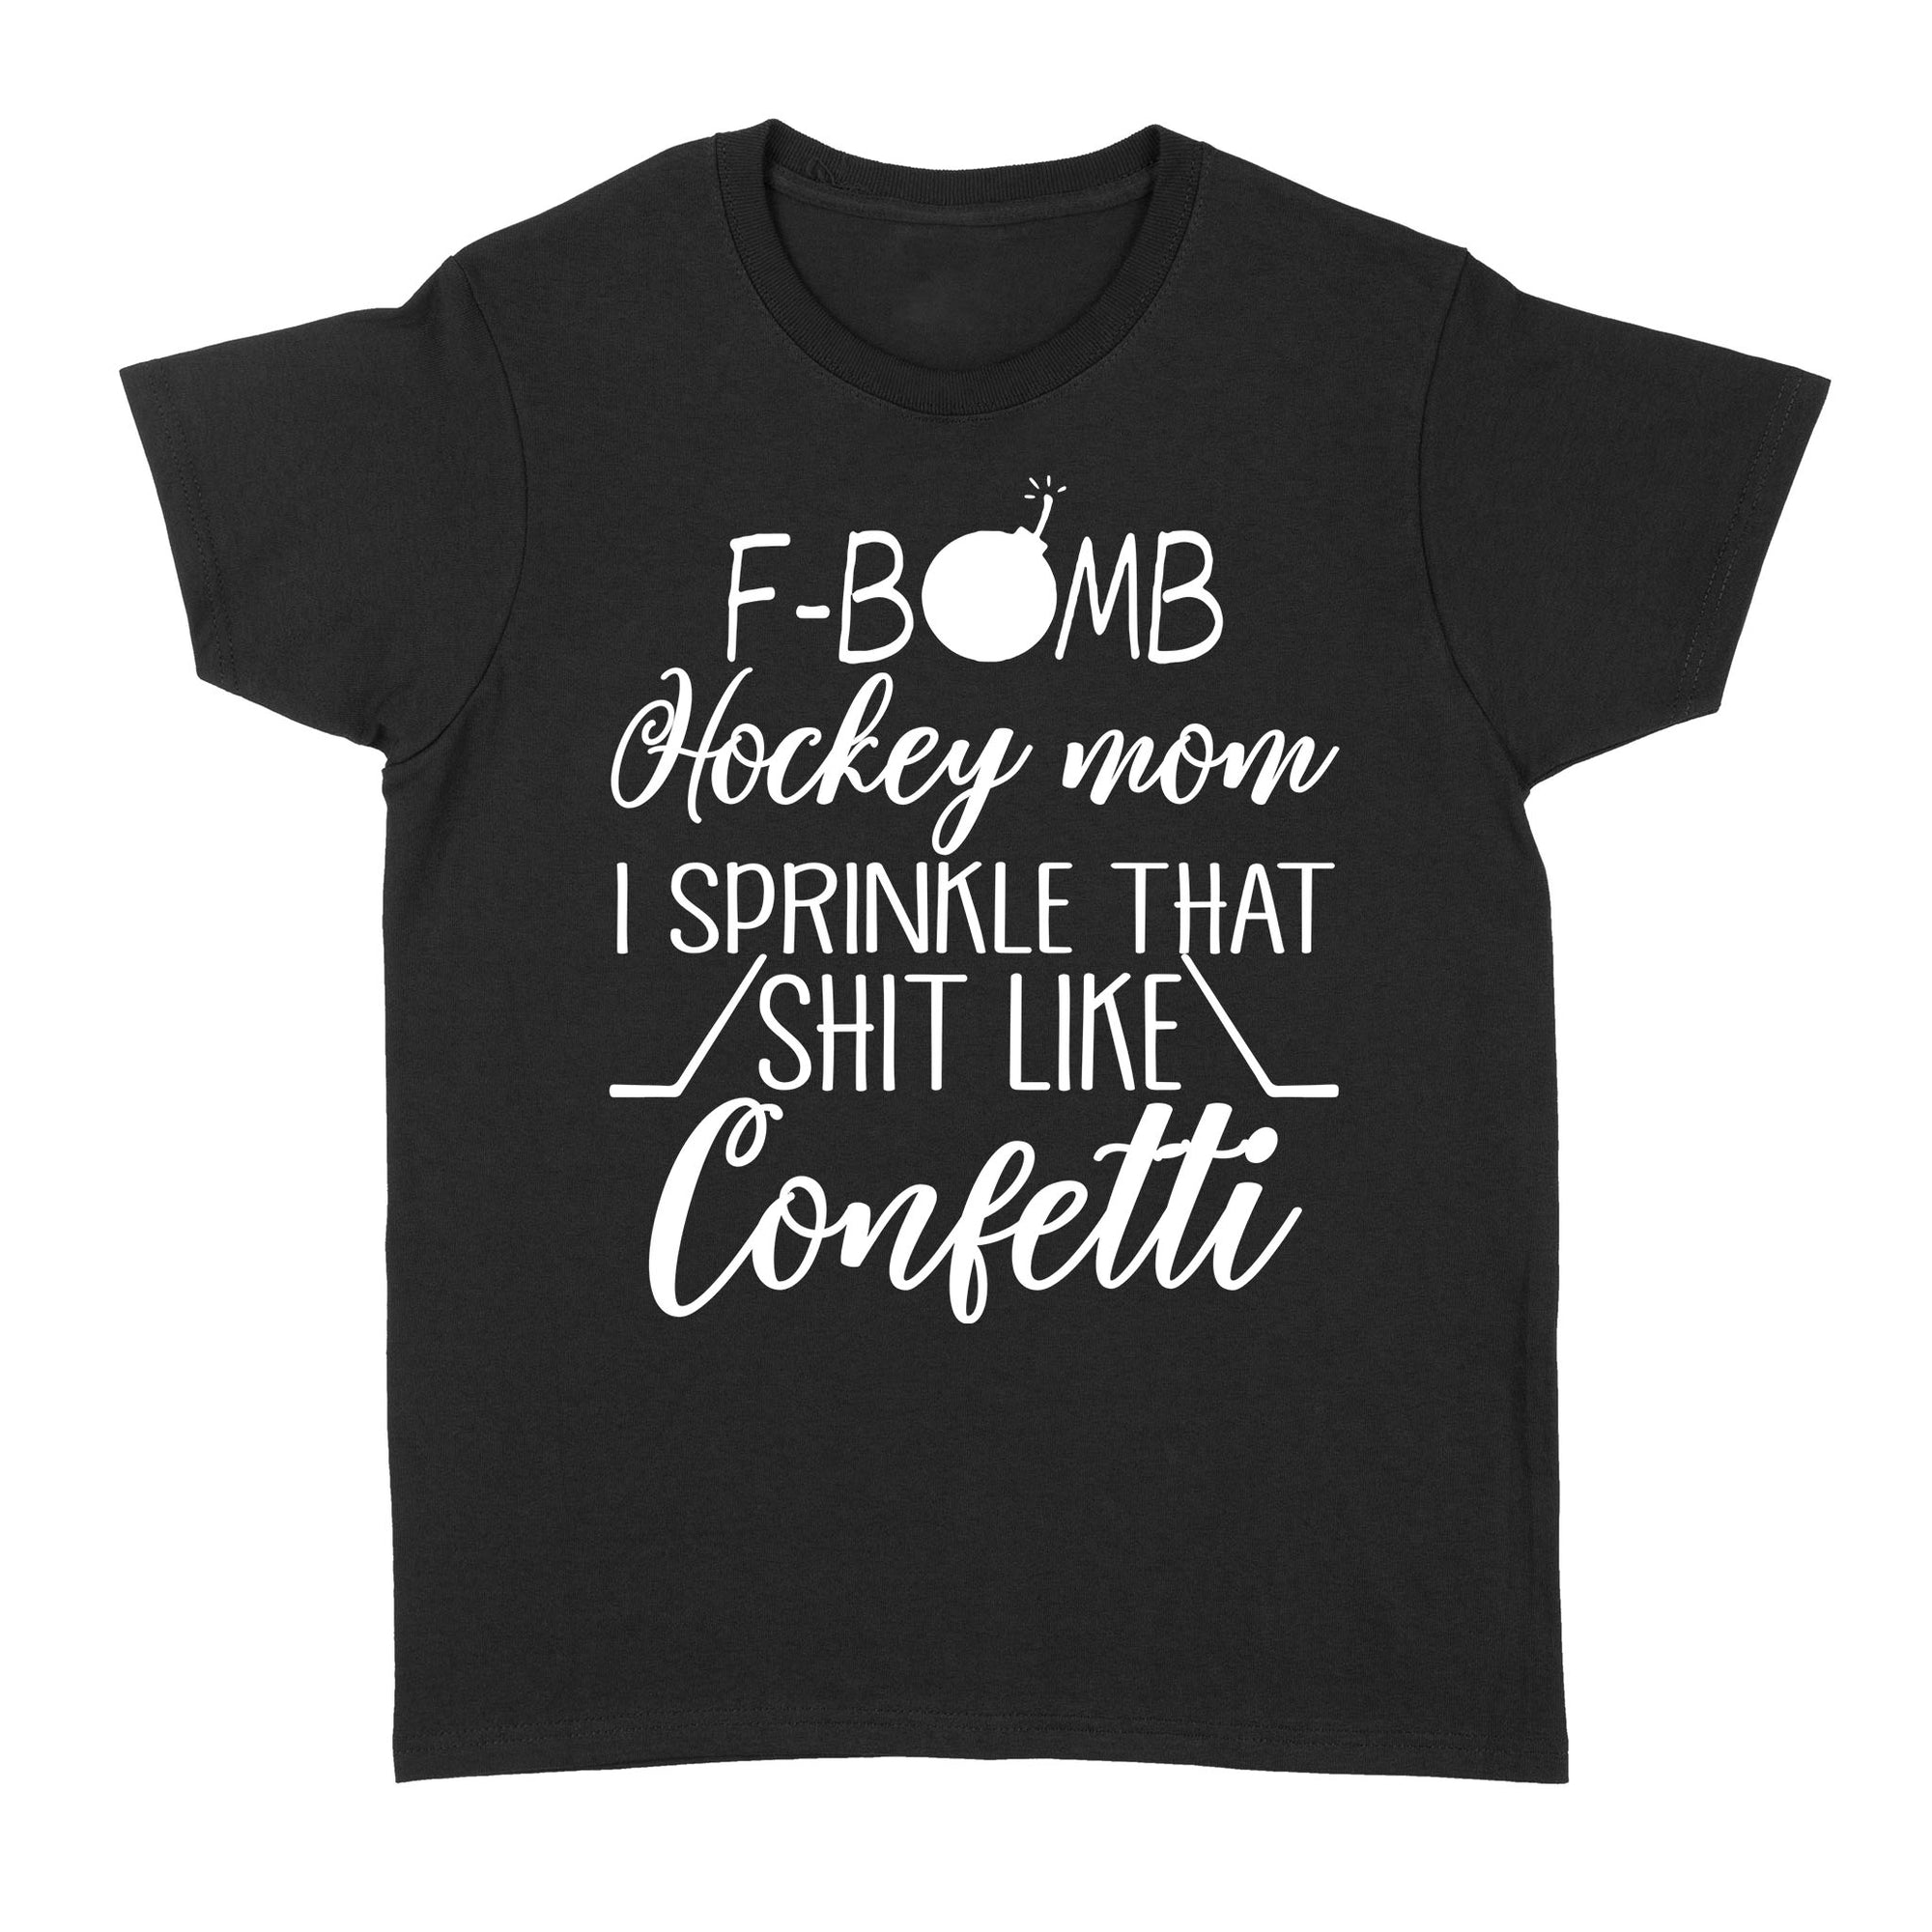 F Bomb Hockey Mom I Sprinkle That Shit Like Confetti Funny Gift ideas for Mom Mother Her Wife - Standard Women's T-shirt